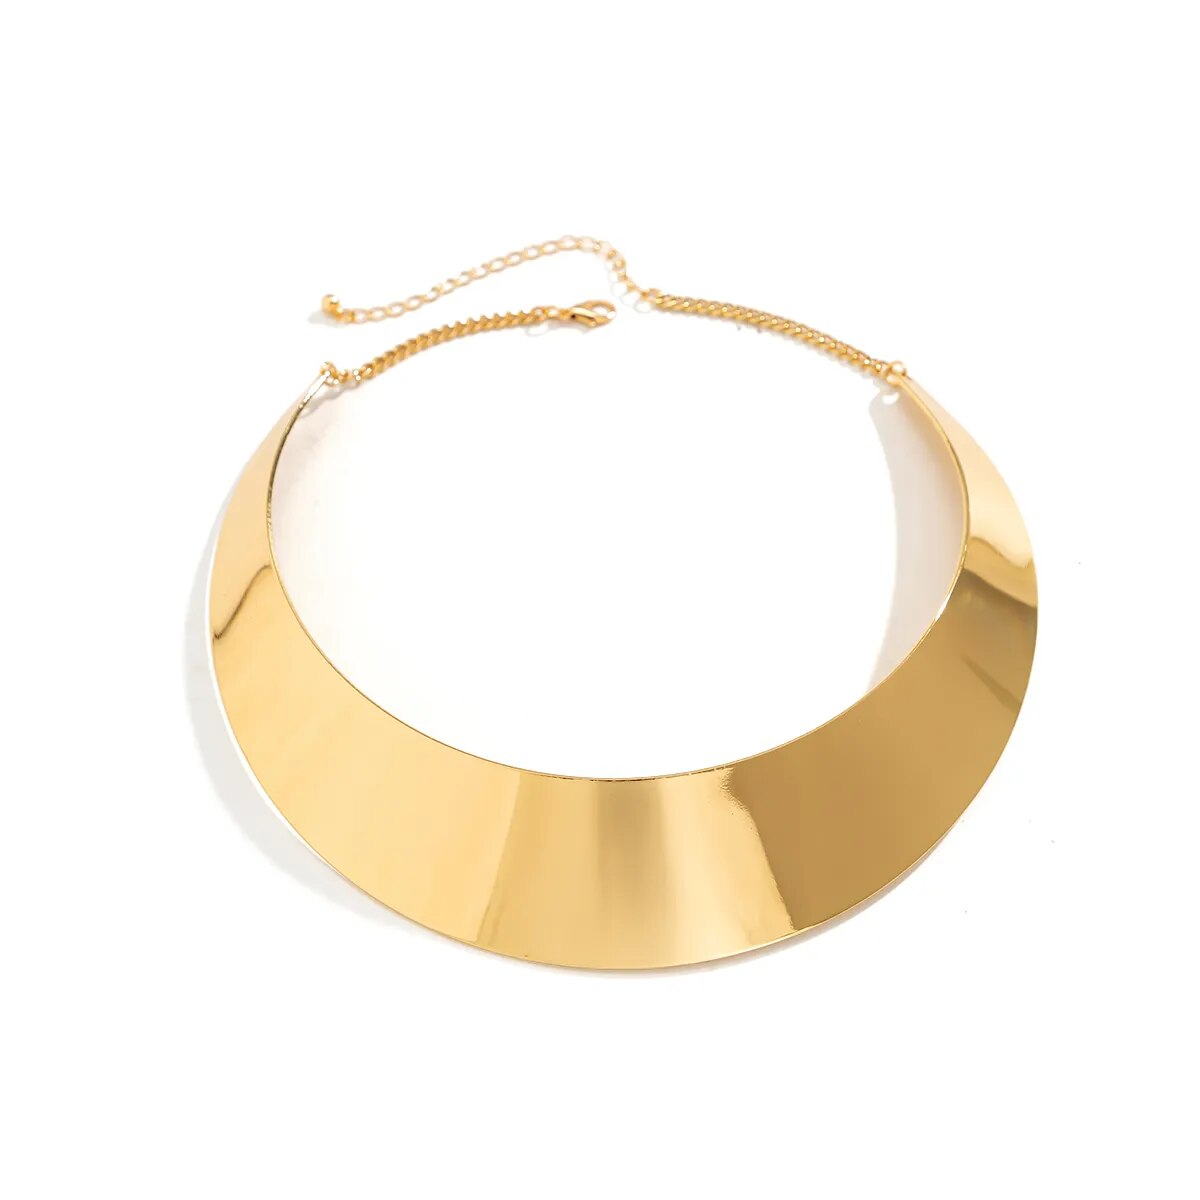 The Candice Choker Necklace